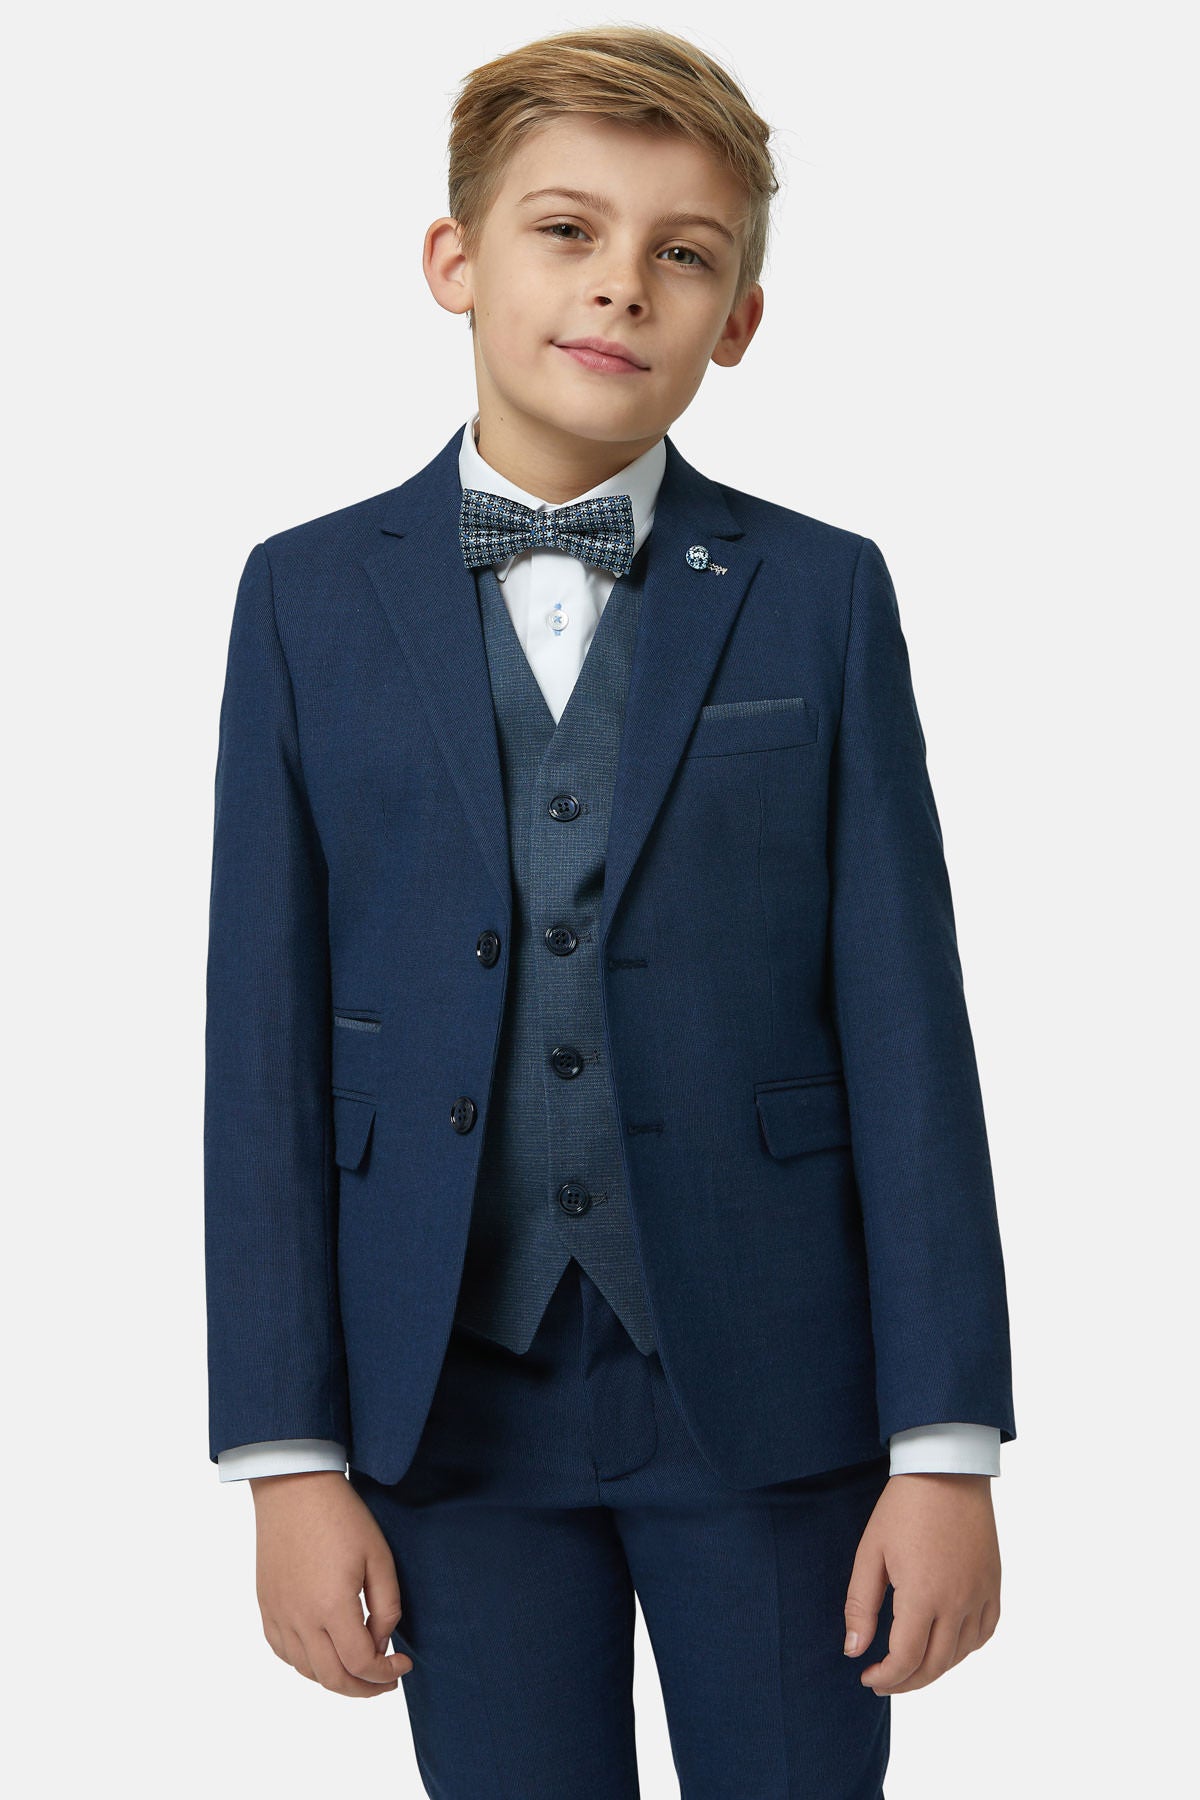 Boys Ronnie Teal 3 Piece Suit-Waistcoat view